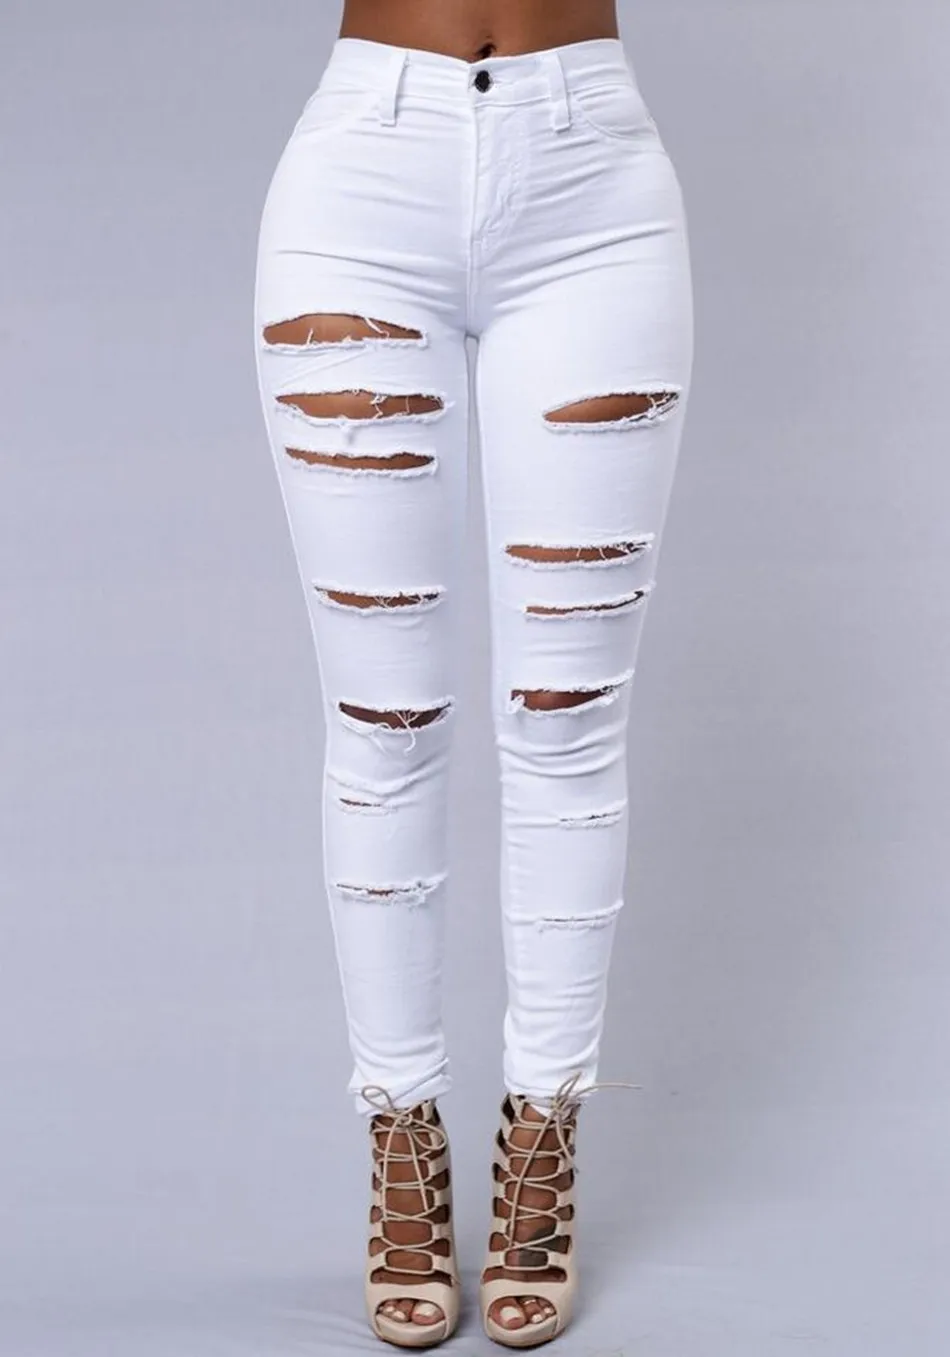 Fashion personality women jeans comfortable jeans female brand in stock accept small order